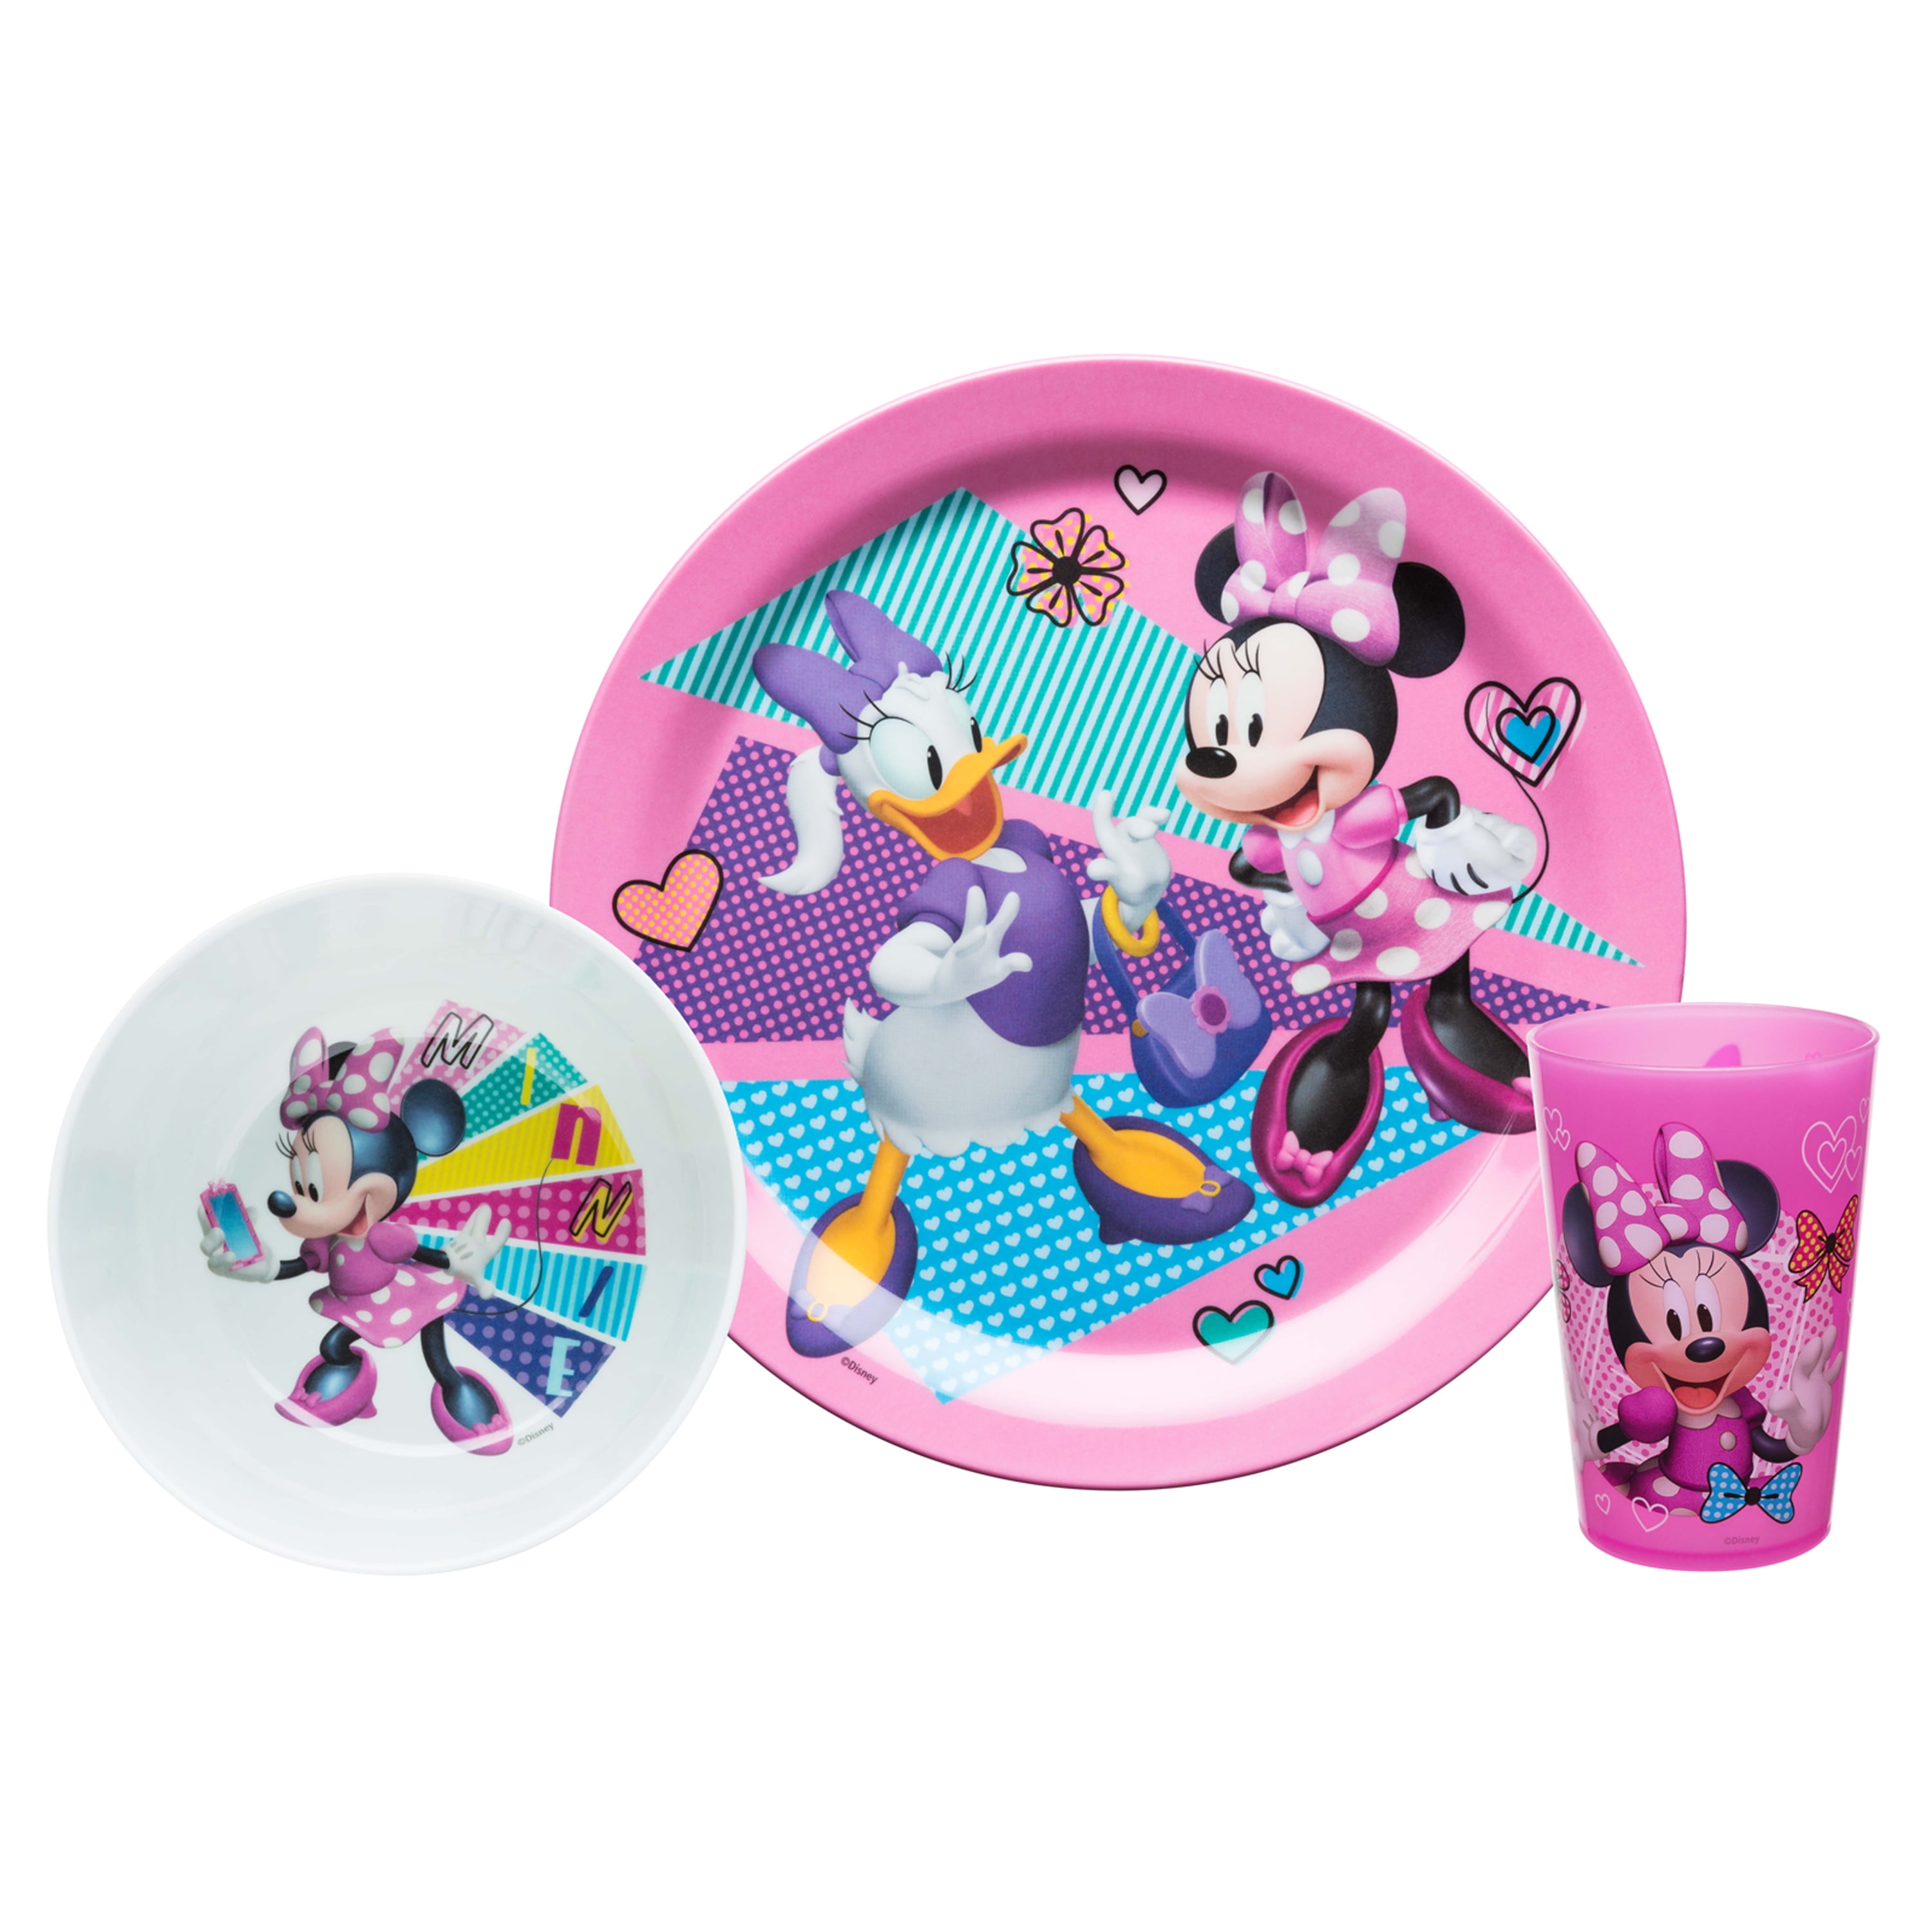 Spoon and Fork Dinnerware Set for Children Plate Tumbler Minnie 5Pcs Coloured BPA Free Melamine Dining Set Bowl